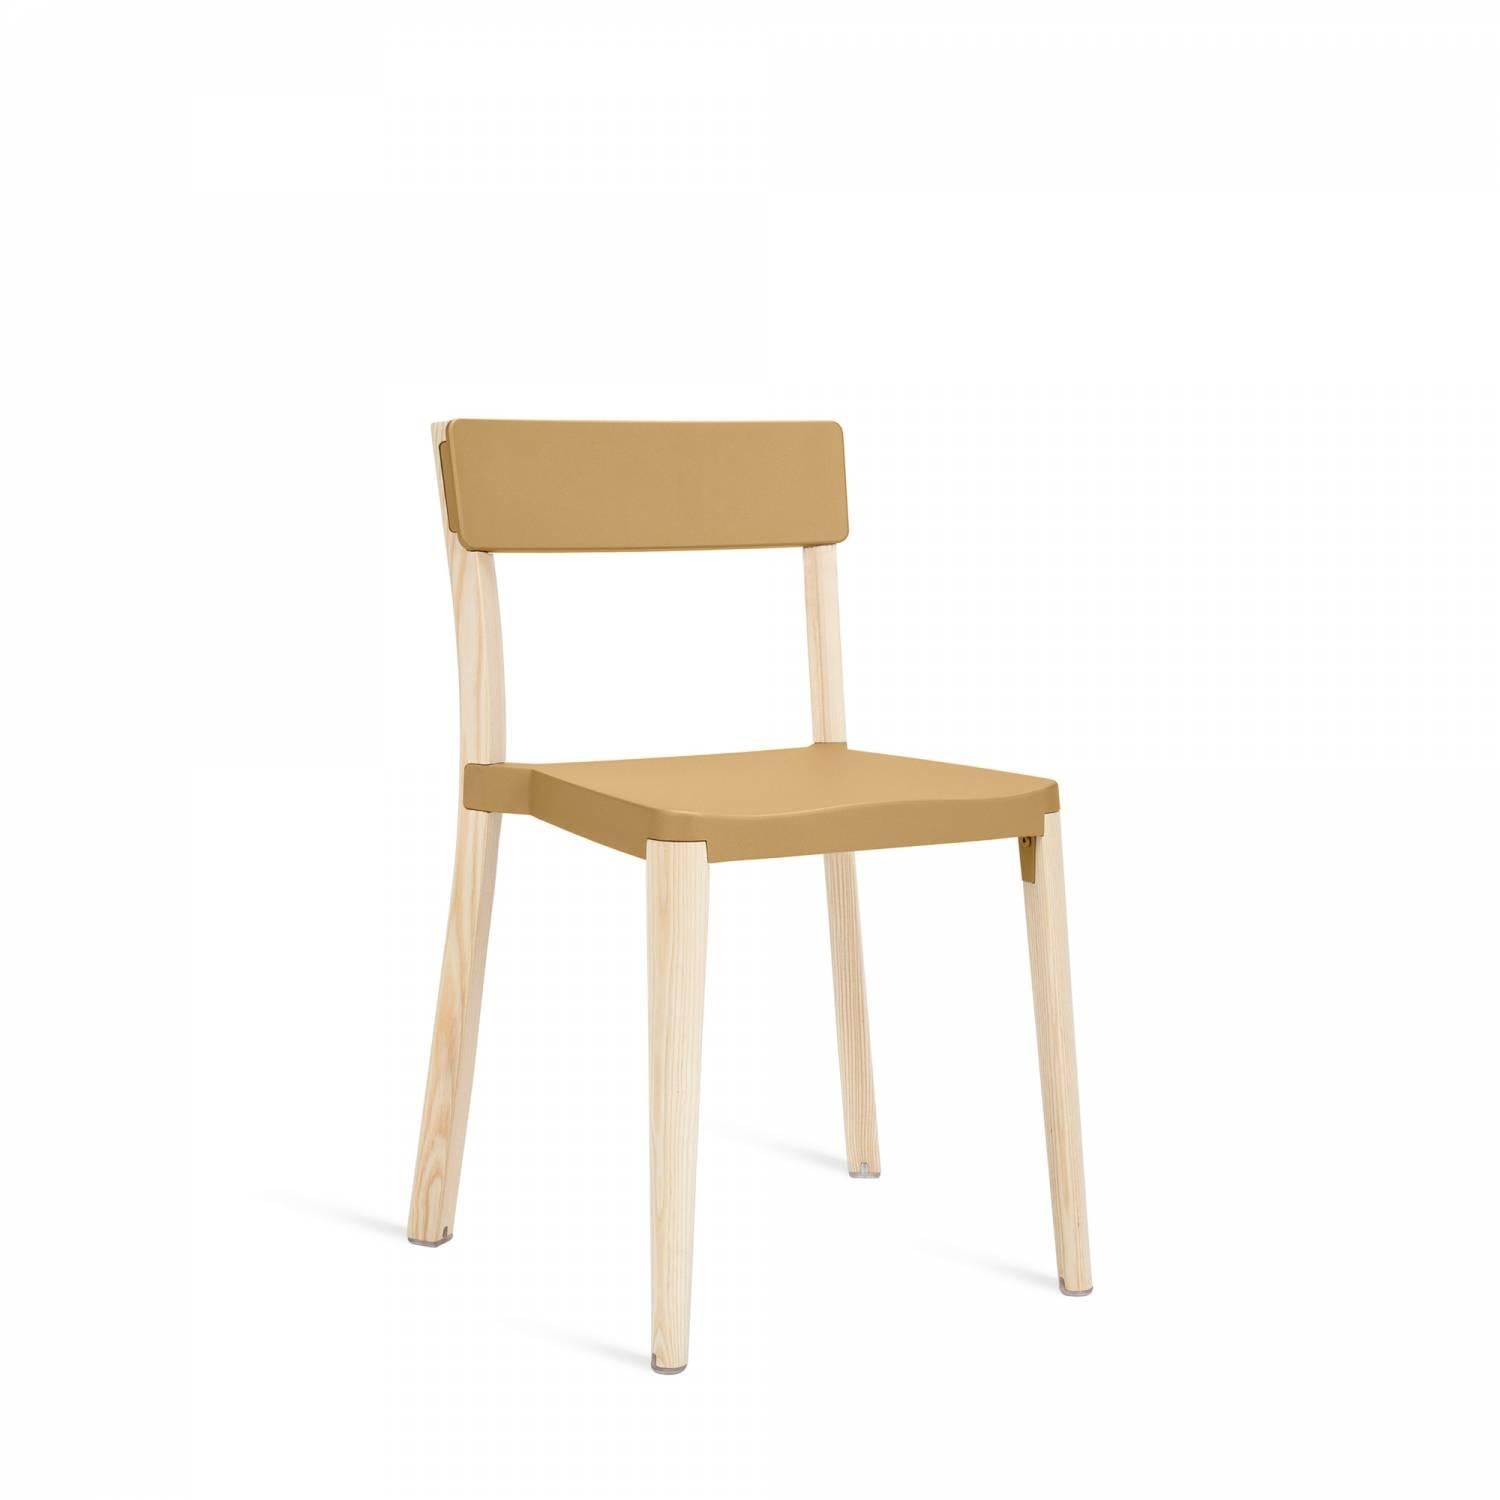 Our clients have asked us to utilize wood in our designs for years. Lancaster features a reclaimed, solid ash frame and recycled die-cast aluminum seat and back- an expression of Industrial technique and warm materials.

Made of: Recycled